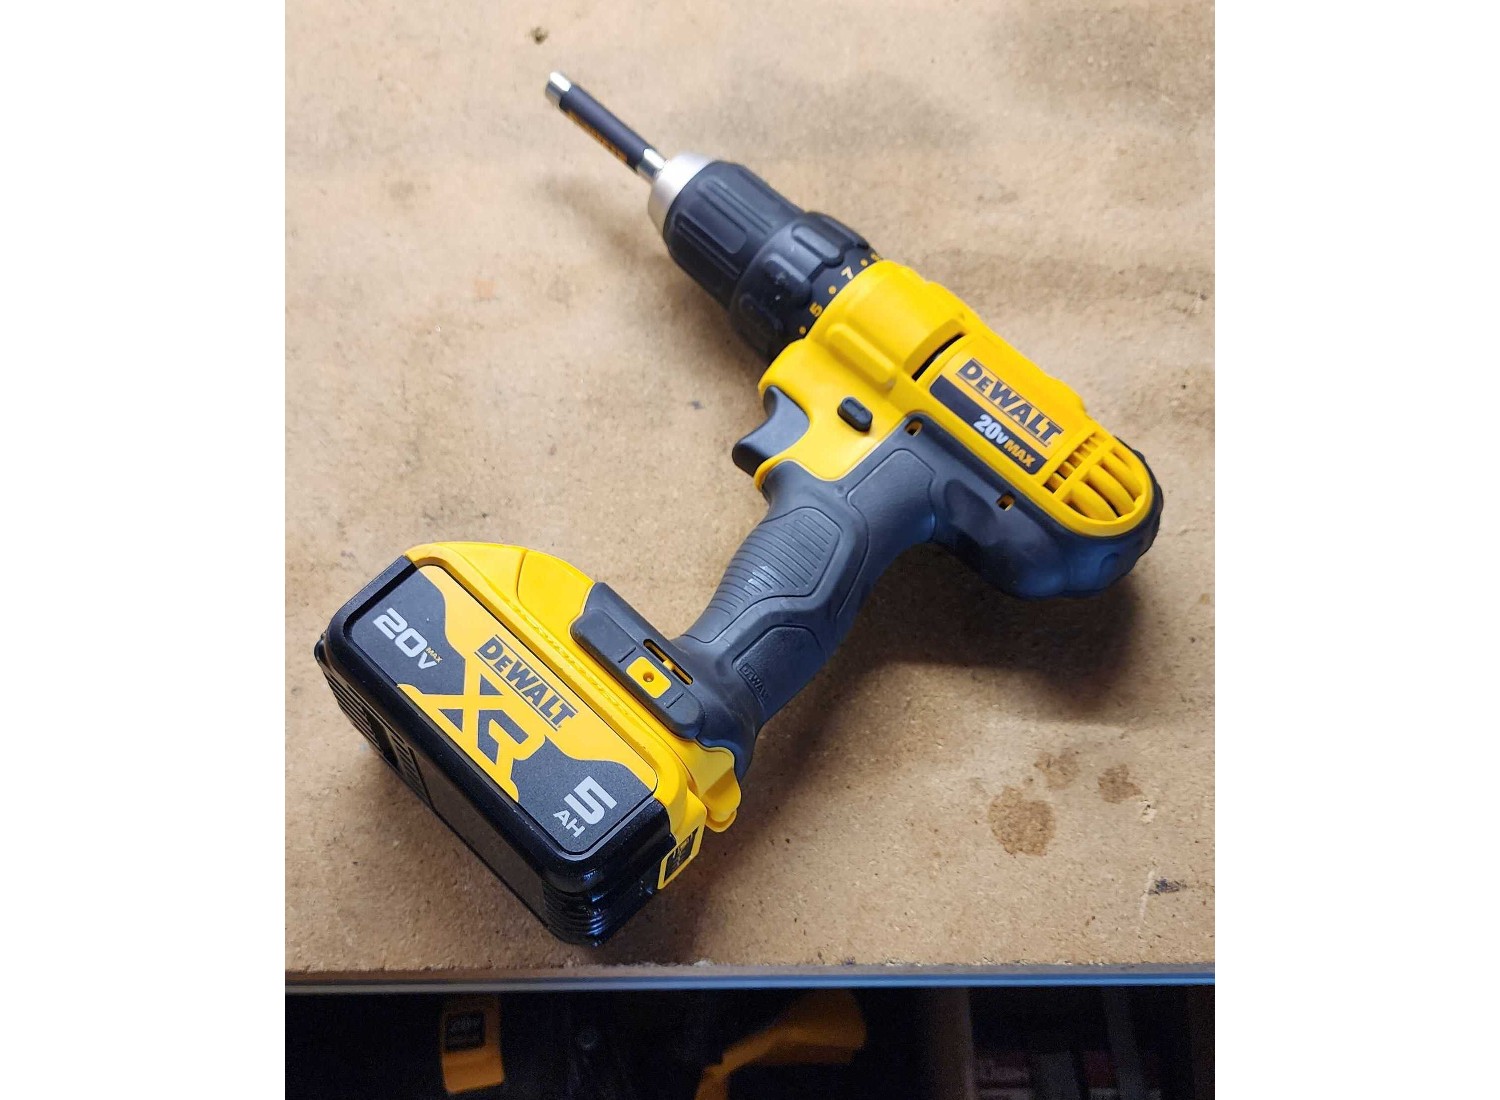 Which DeWALT tools are the most useful?